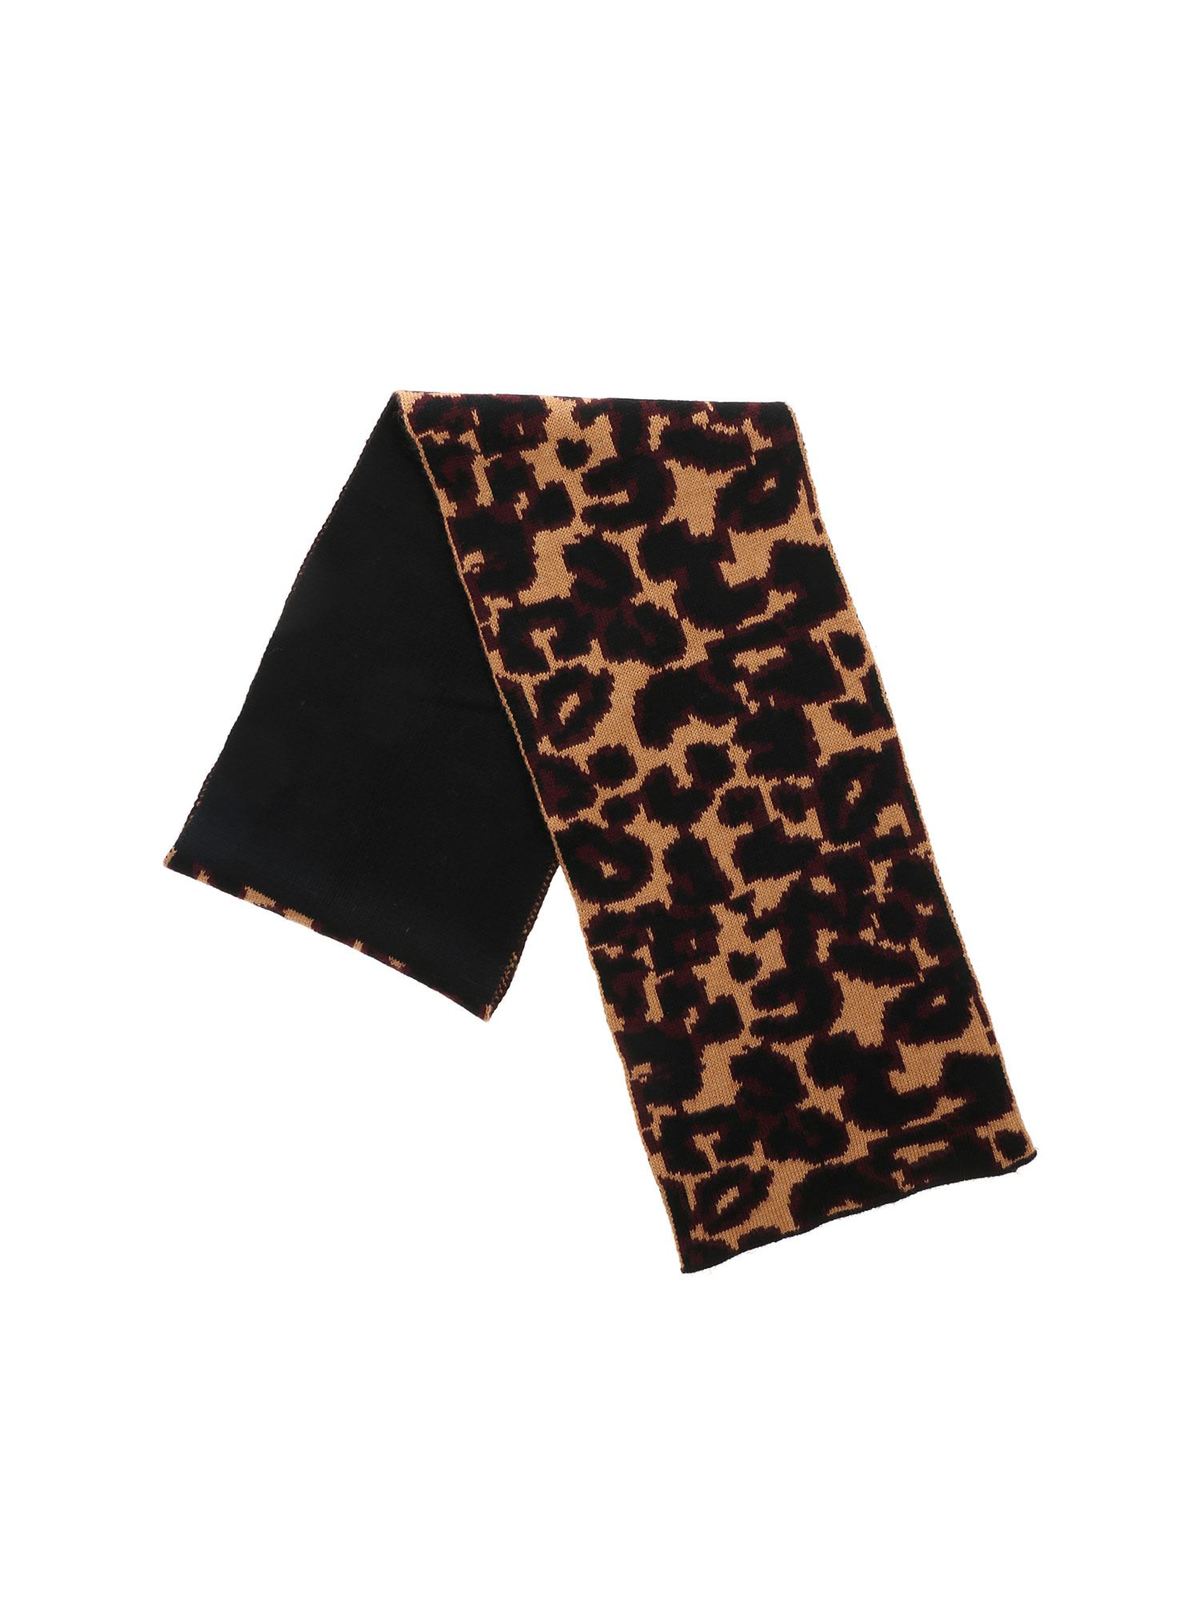 Lulu Guinness Wild Cat Scarf In Black And Animal Print